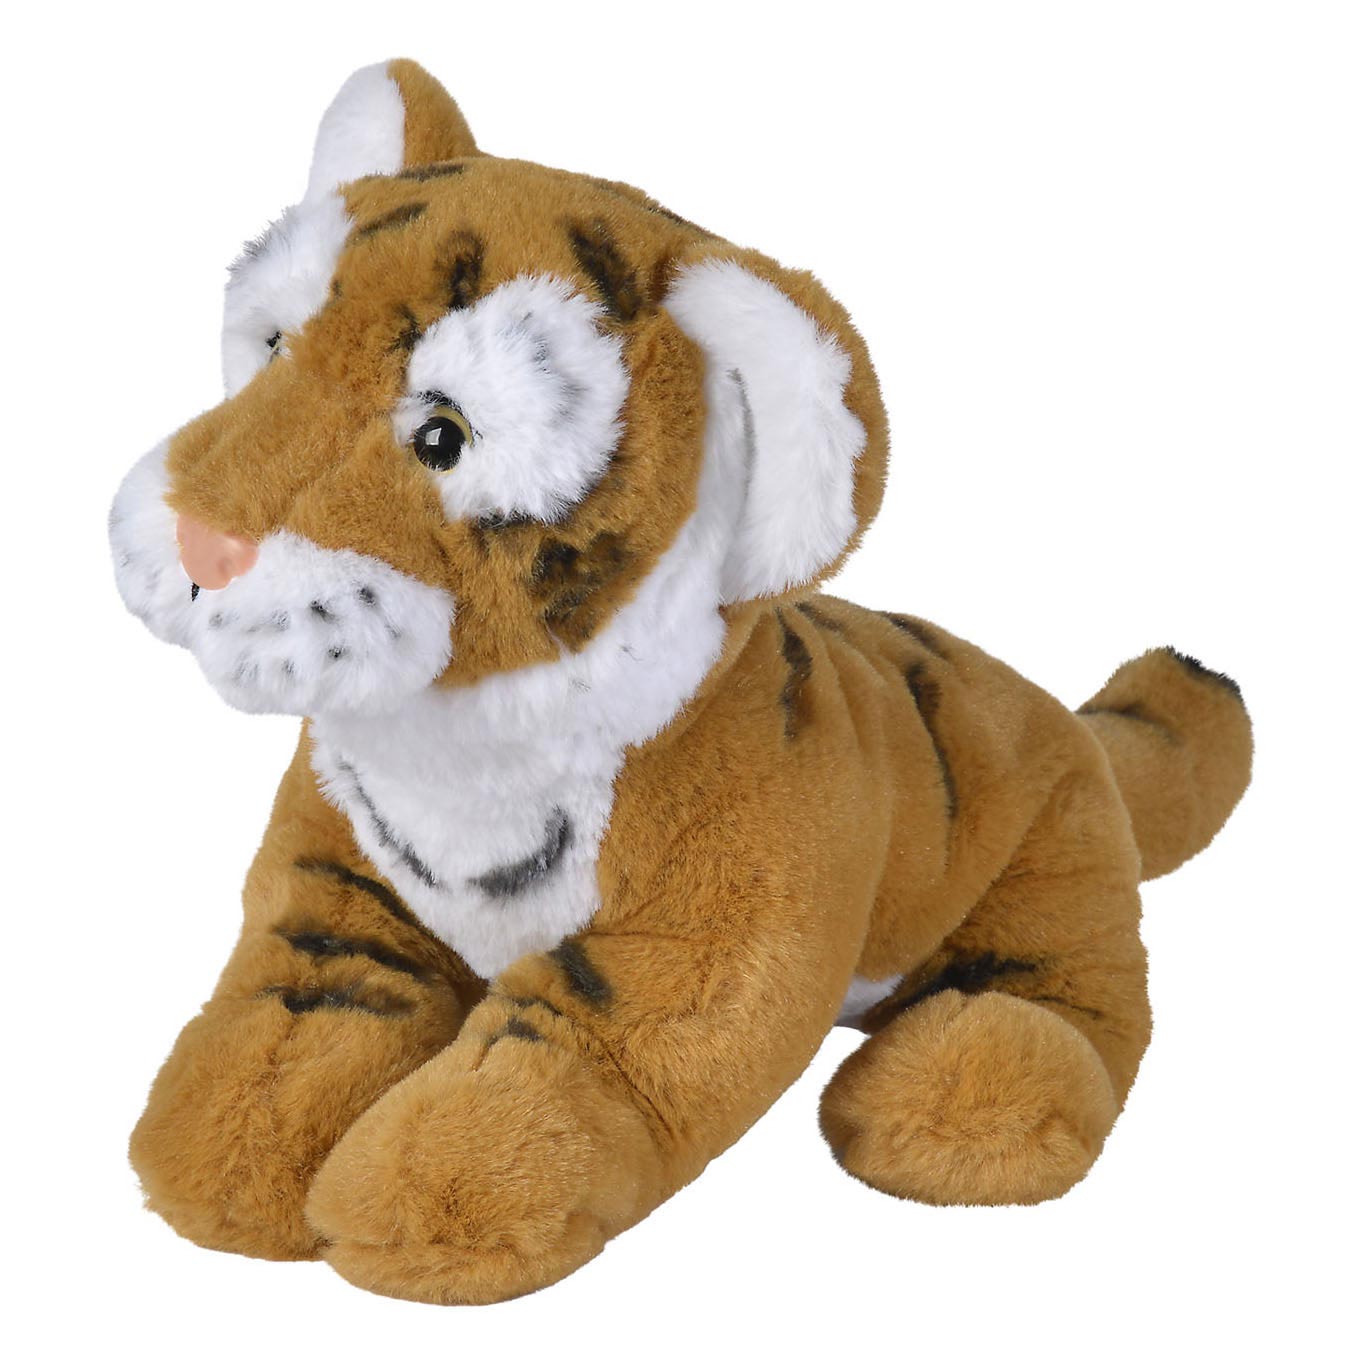 Donder Nationaal volkslied Reclame National Geographic Knuffel Bengal-Tiger, 25cm - Speelgoed Winkel Toy plaza